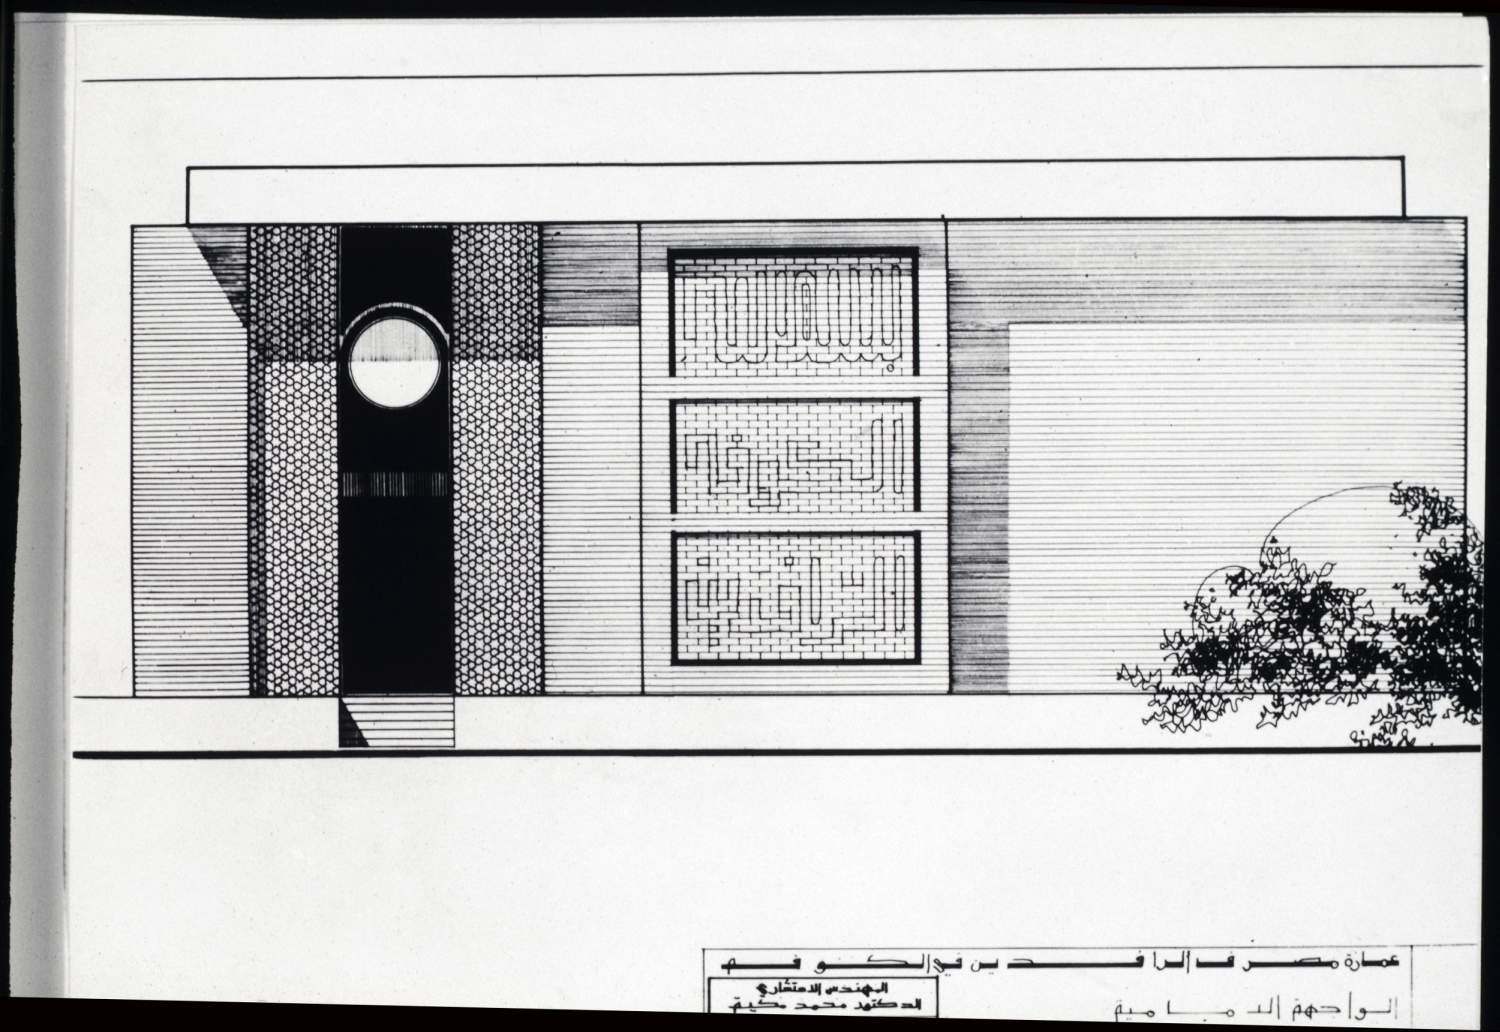 <p>Entrance facade: elevation showing design concept with geometric screen and brickwork calligraphy</p>